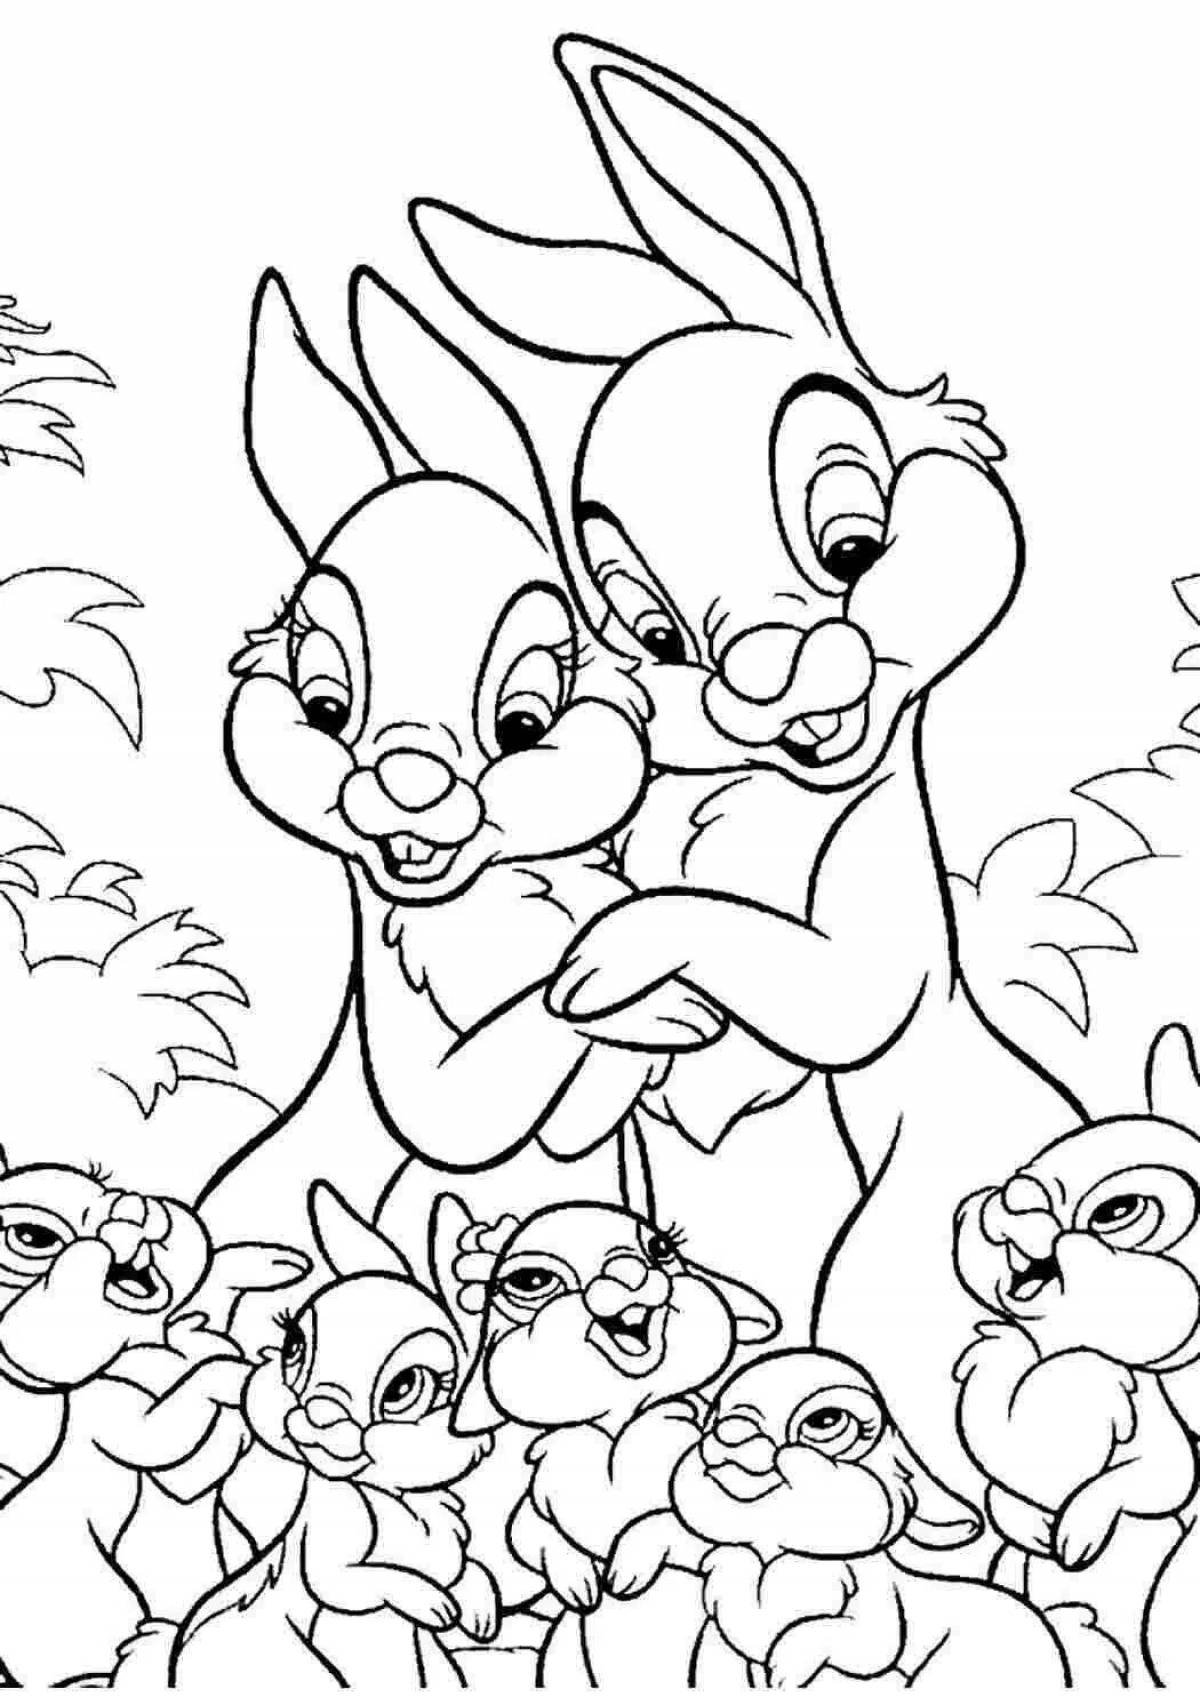 Coloring book dazzling hare for girls